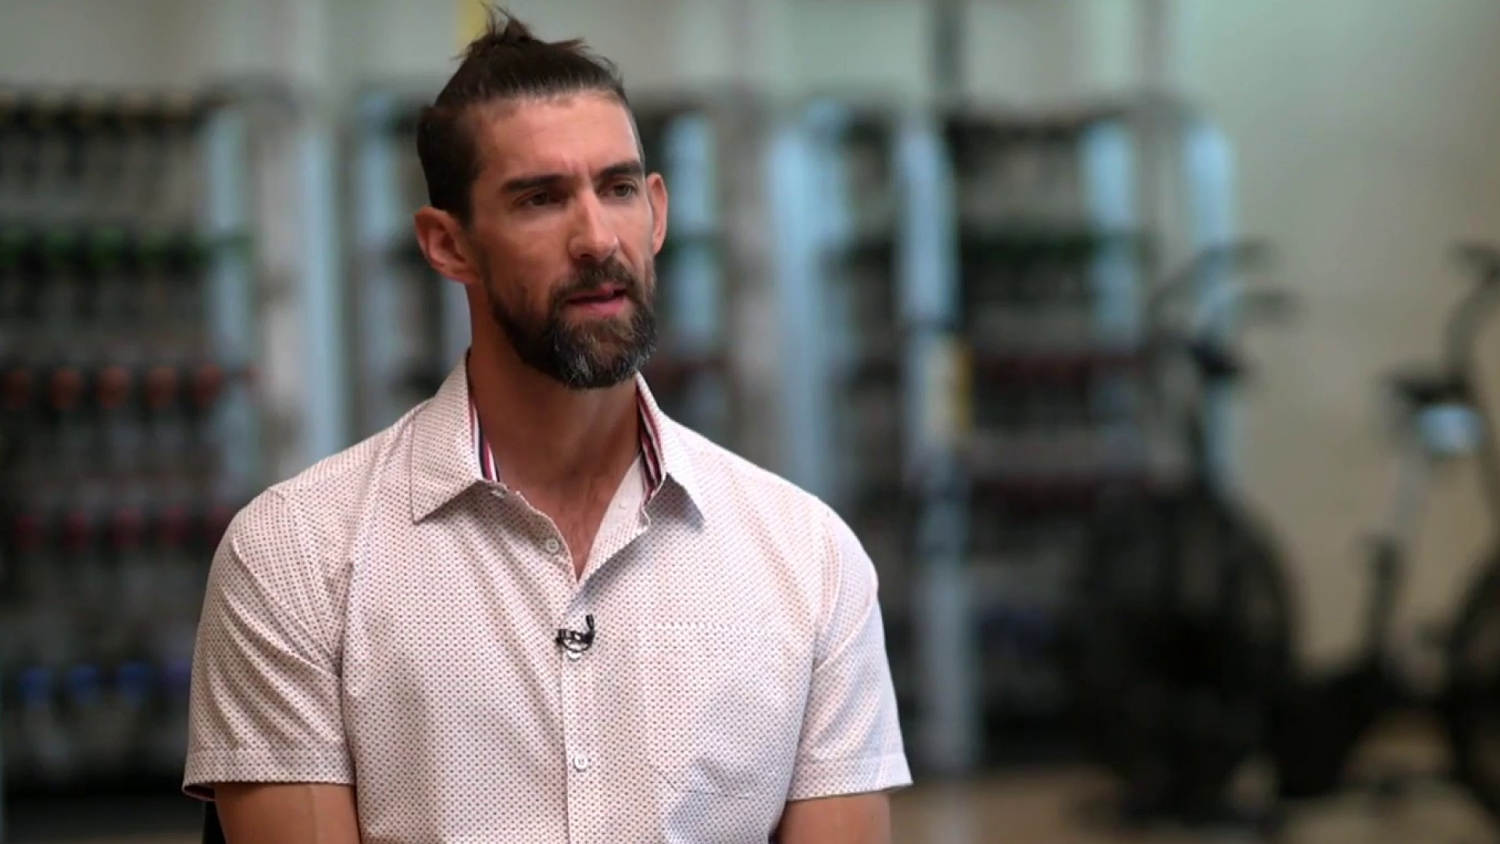 Michael Phelps reflects on depression and mental health: 'I saw it as a sign of weakness'